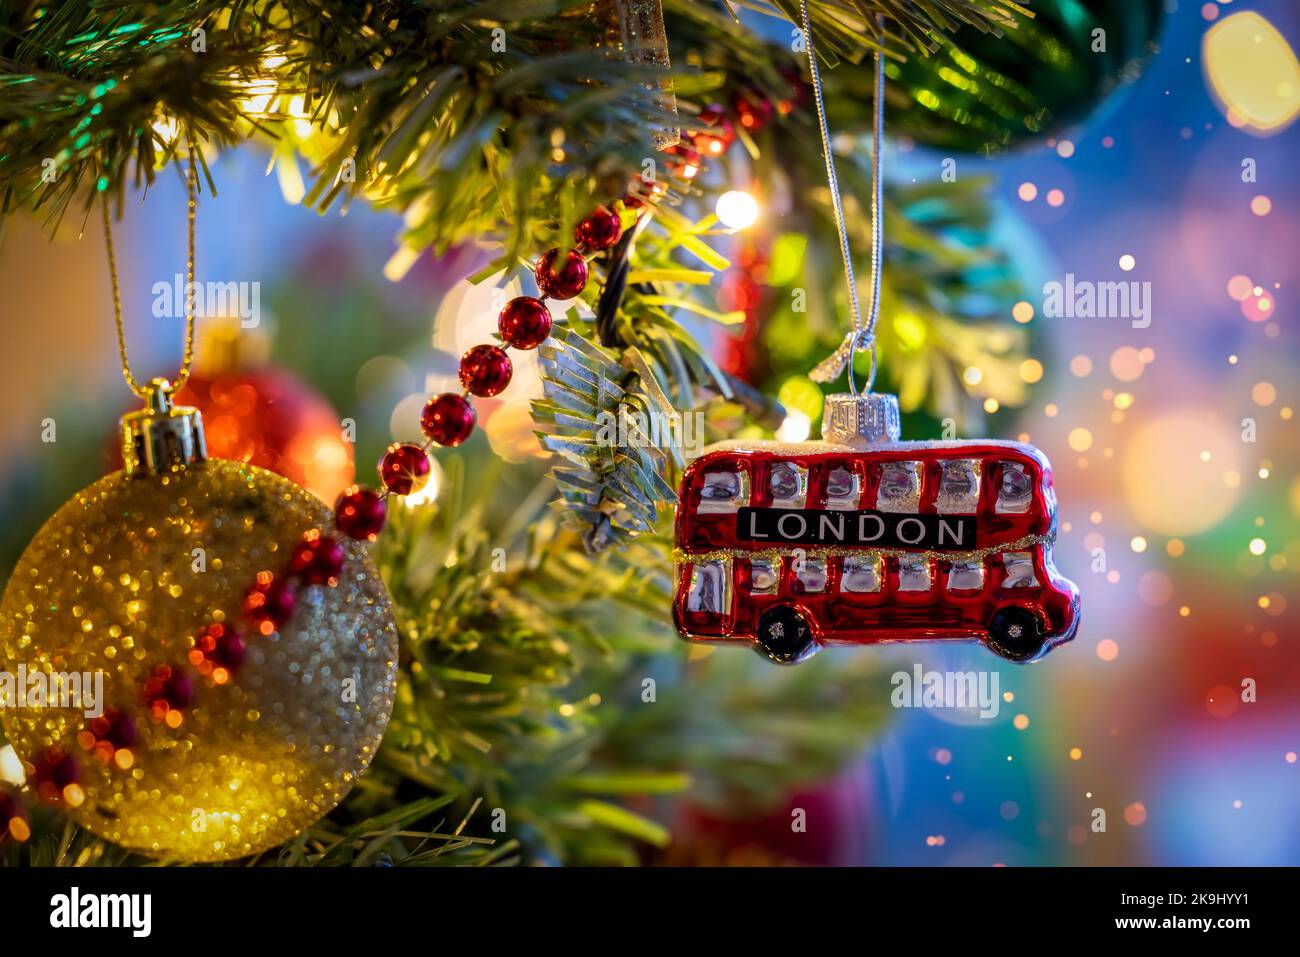 A little, red double decker bus from London as a christmas ornament Stock Photo